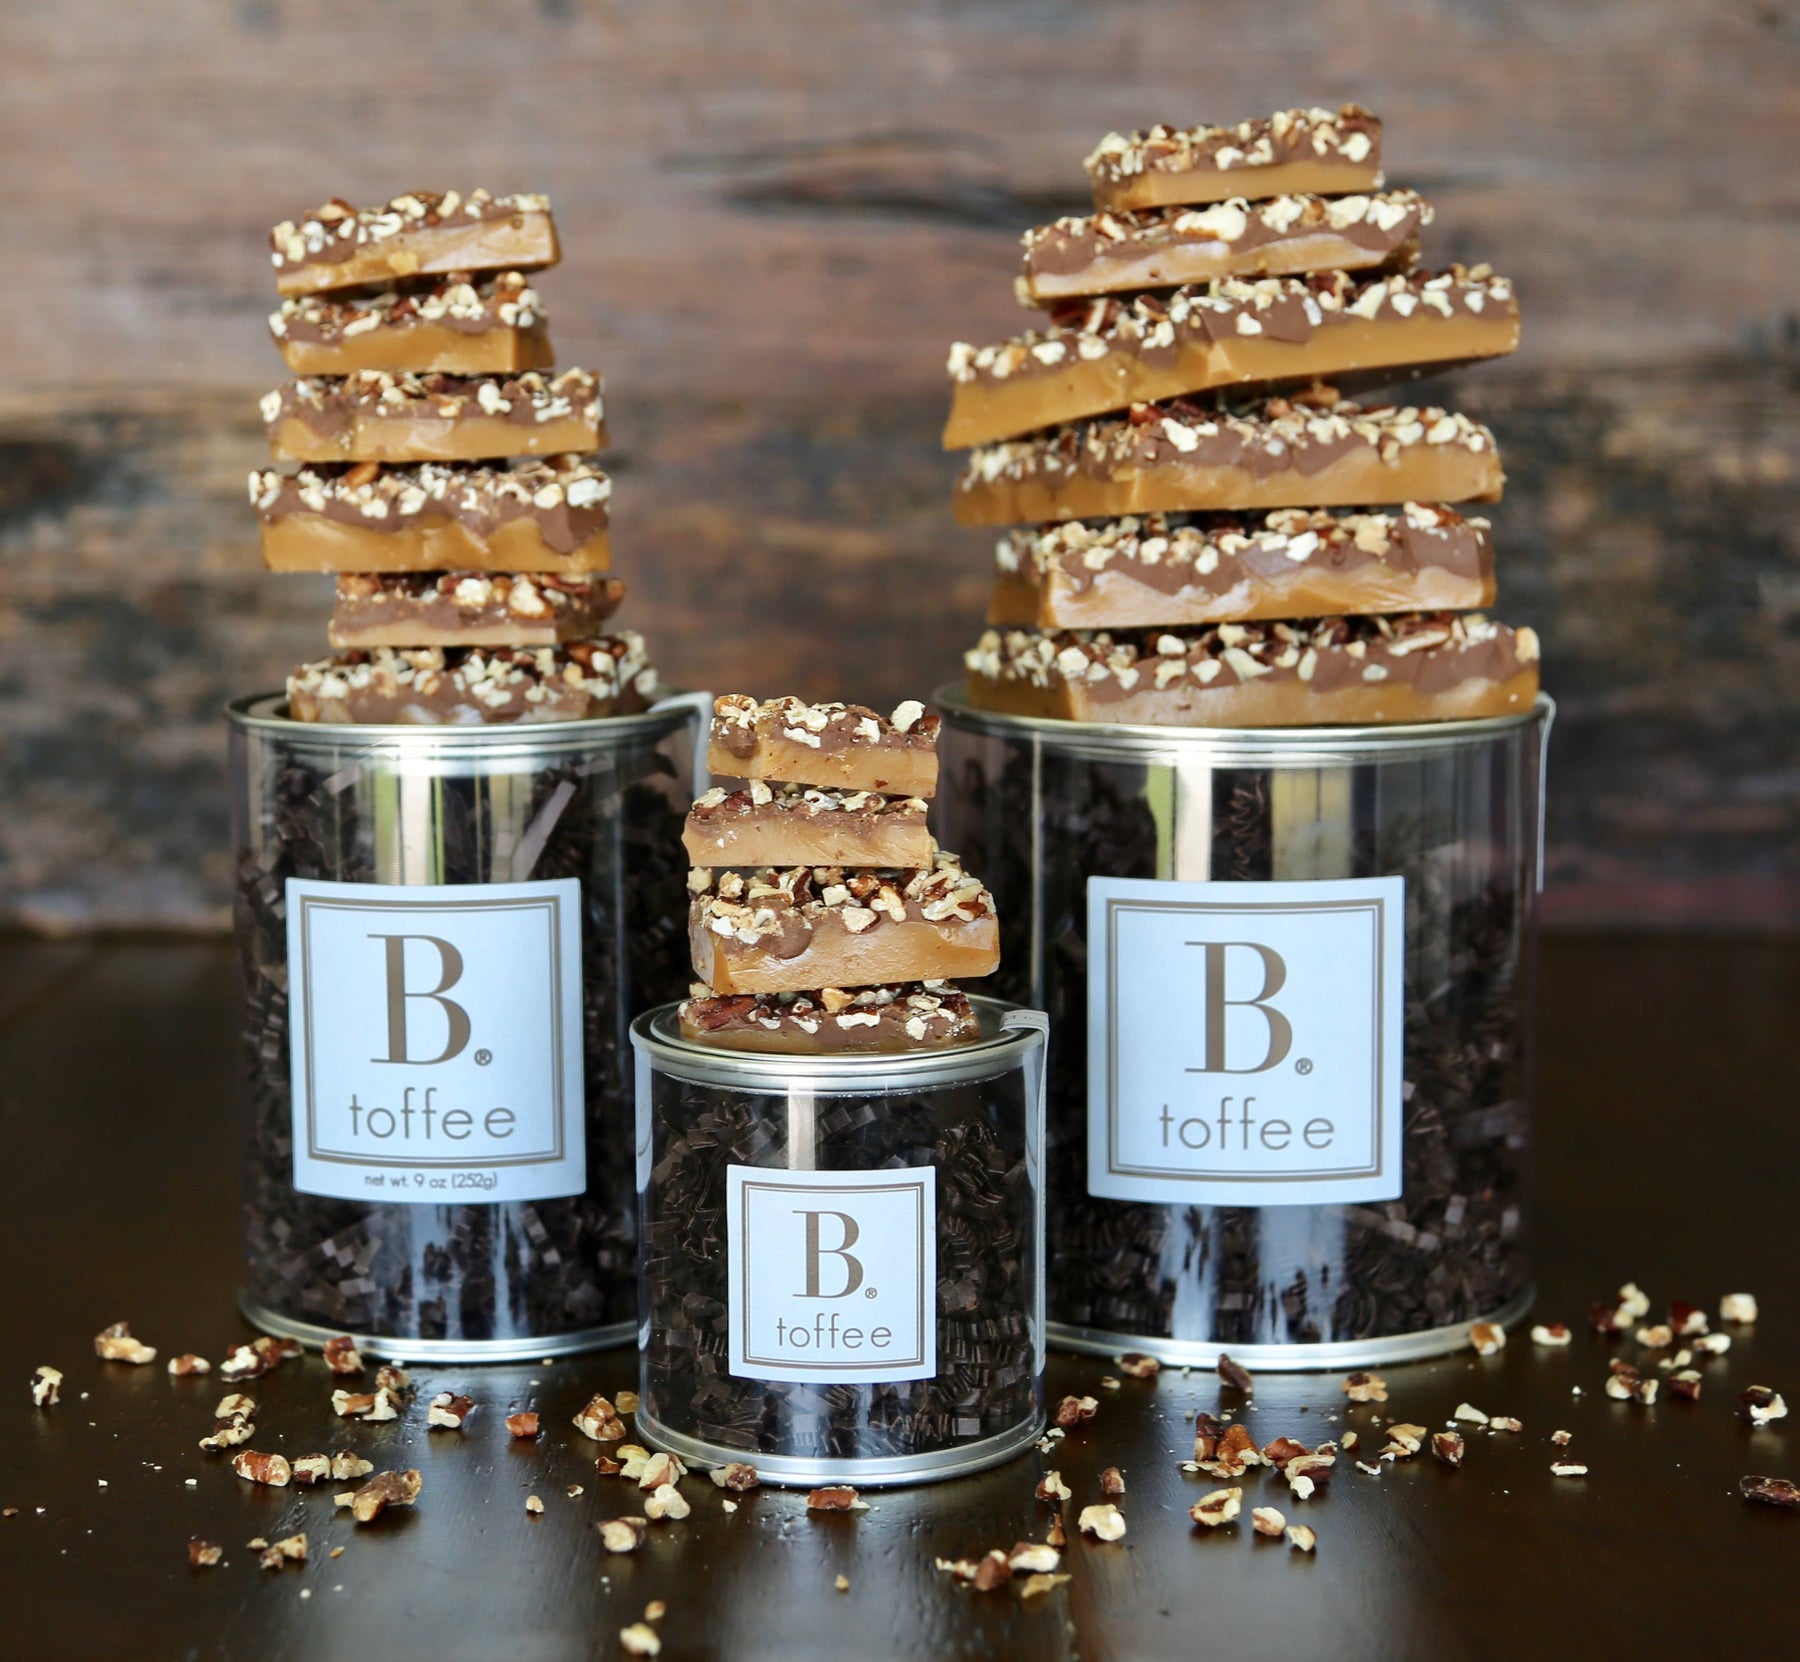 Season and Stir™ - B. toffee Signature Toffee Canisters